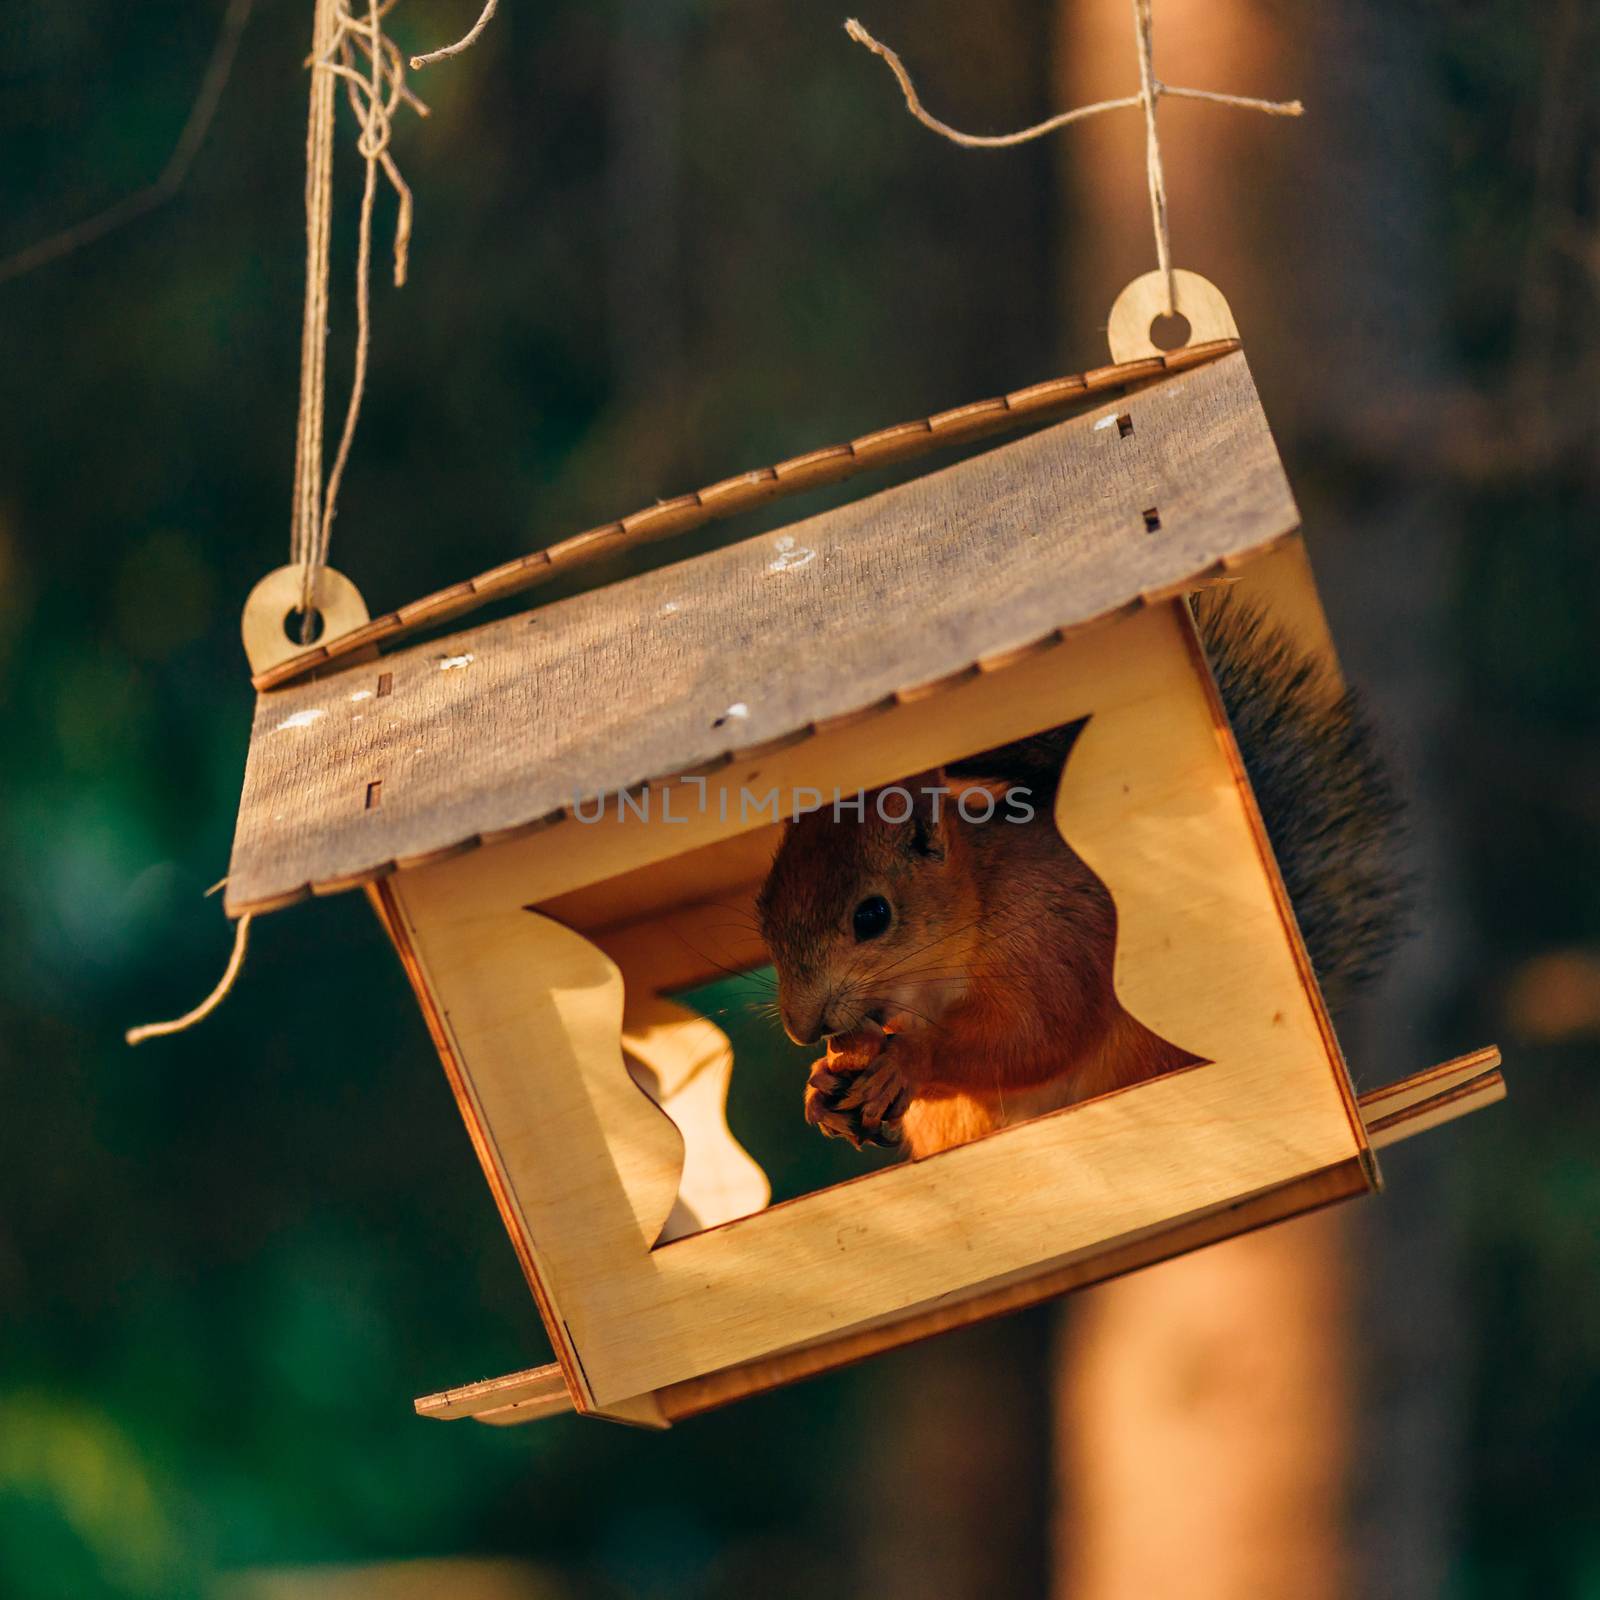 Red squirrel eats nuts in handmade feeder in city park.